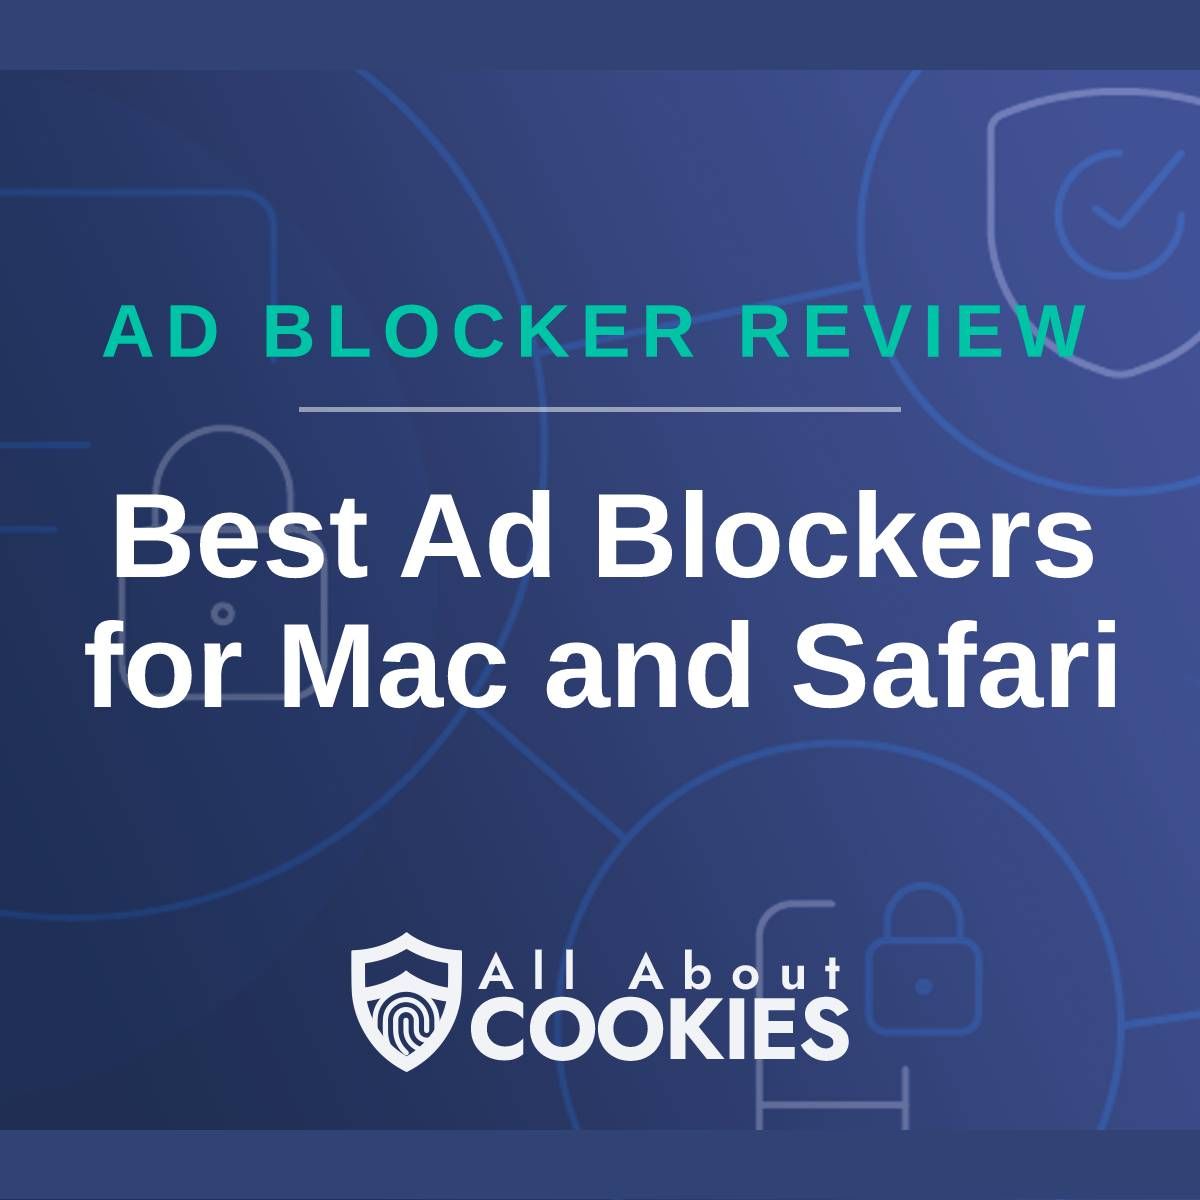 A blue background with images of locks and shields with the text &quot;Ad Blocker Review Best Ad Blockers for Mac and Safari&quot; and the All About Cookies logo. 